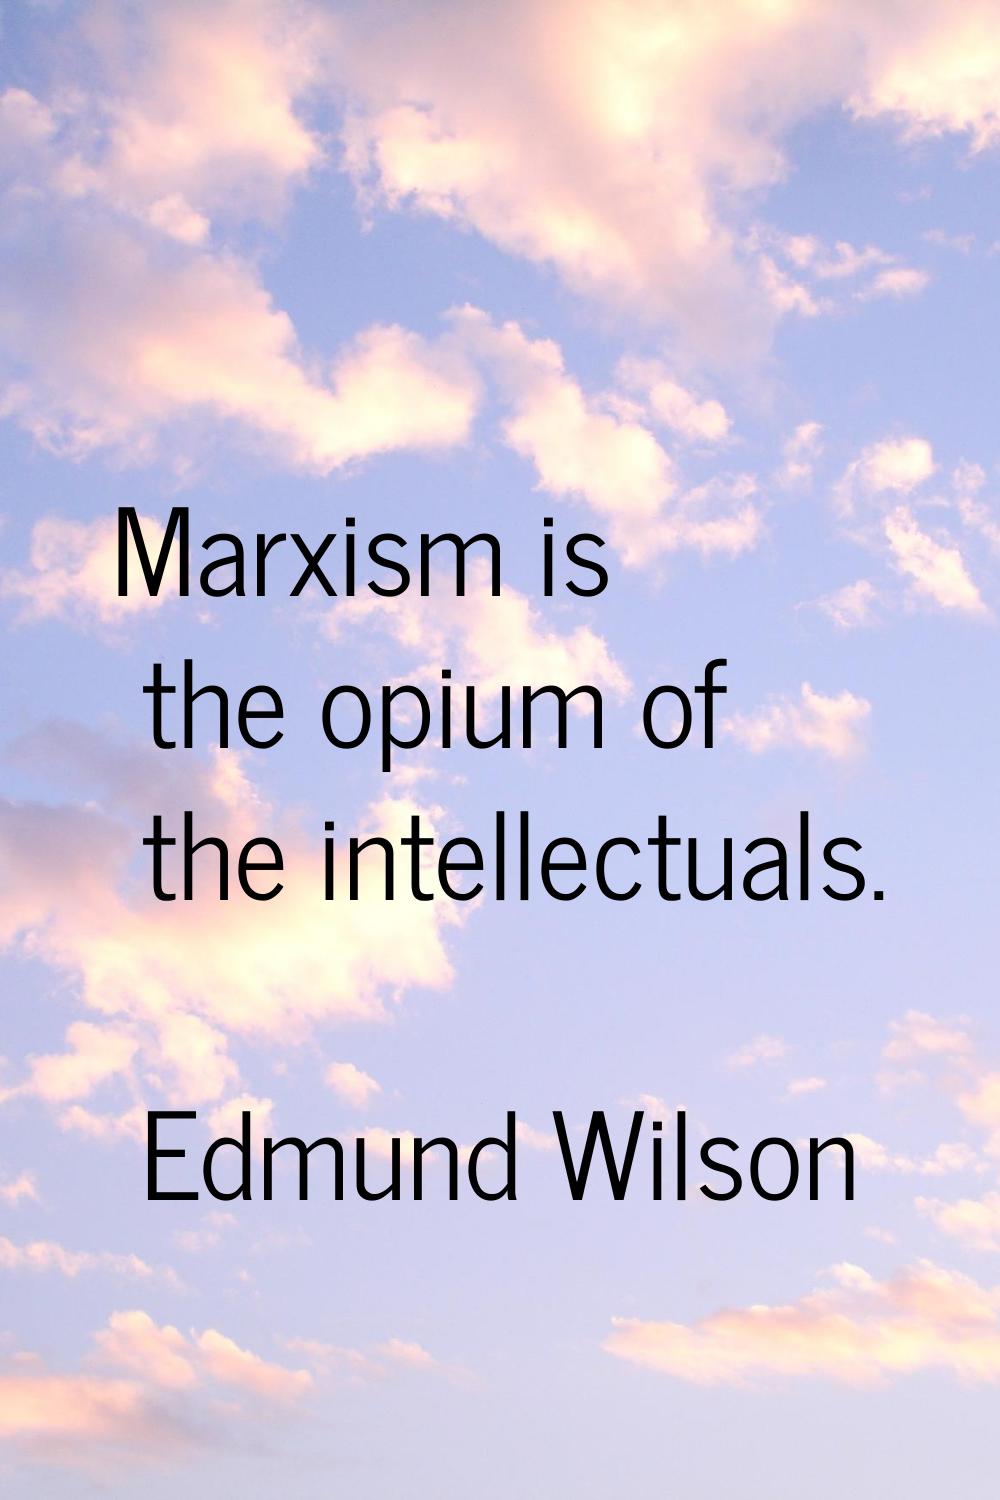 Marxism is the opium of the intellectuals.